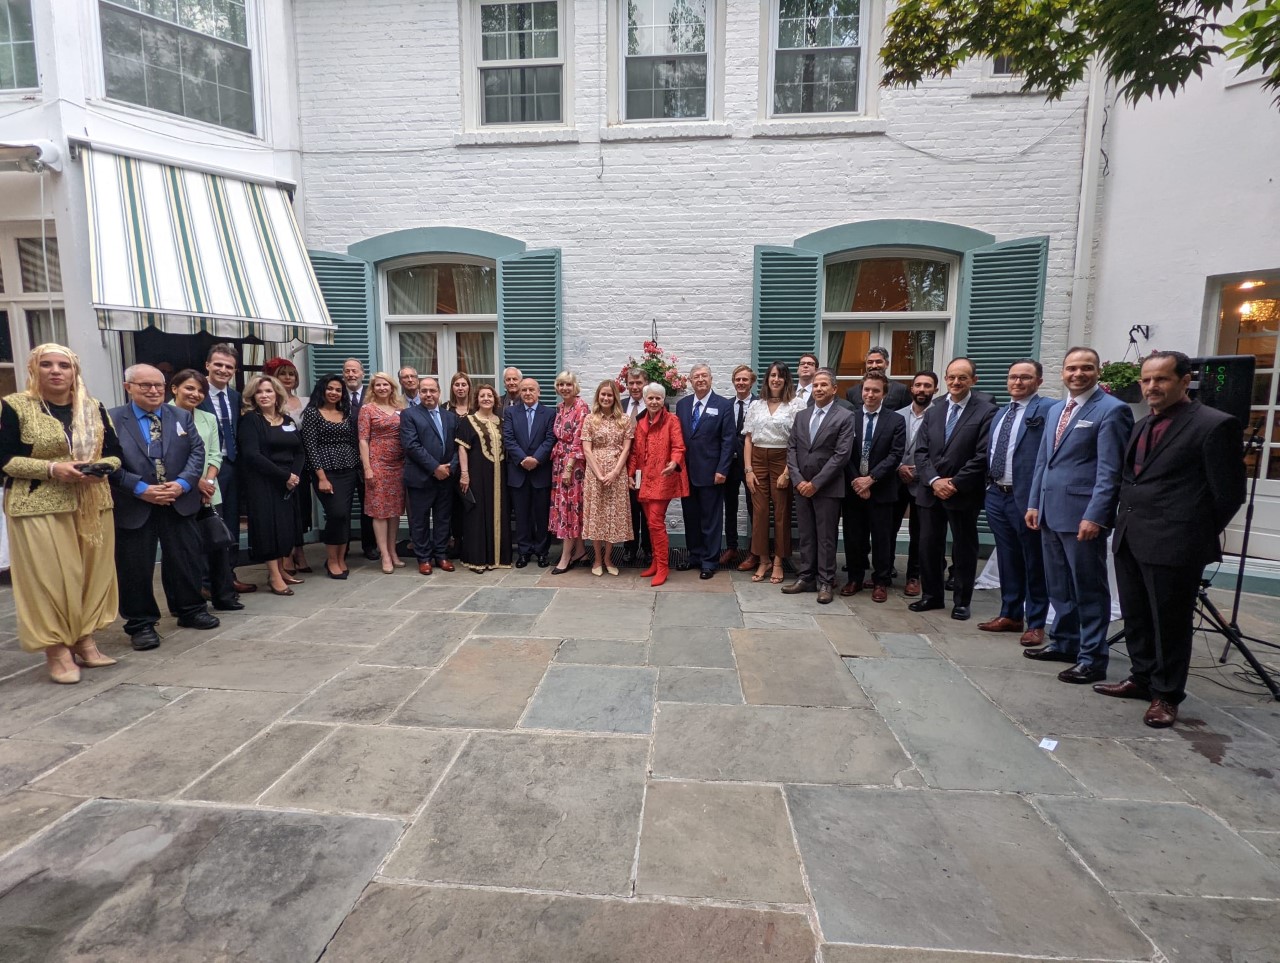 Club members and Algerian officials mingle at The Elms, the residence of Algerian Ambassador Ahmed Boutache and his wife, Fatima Boutache. 